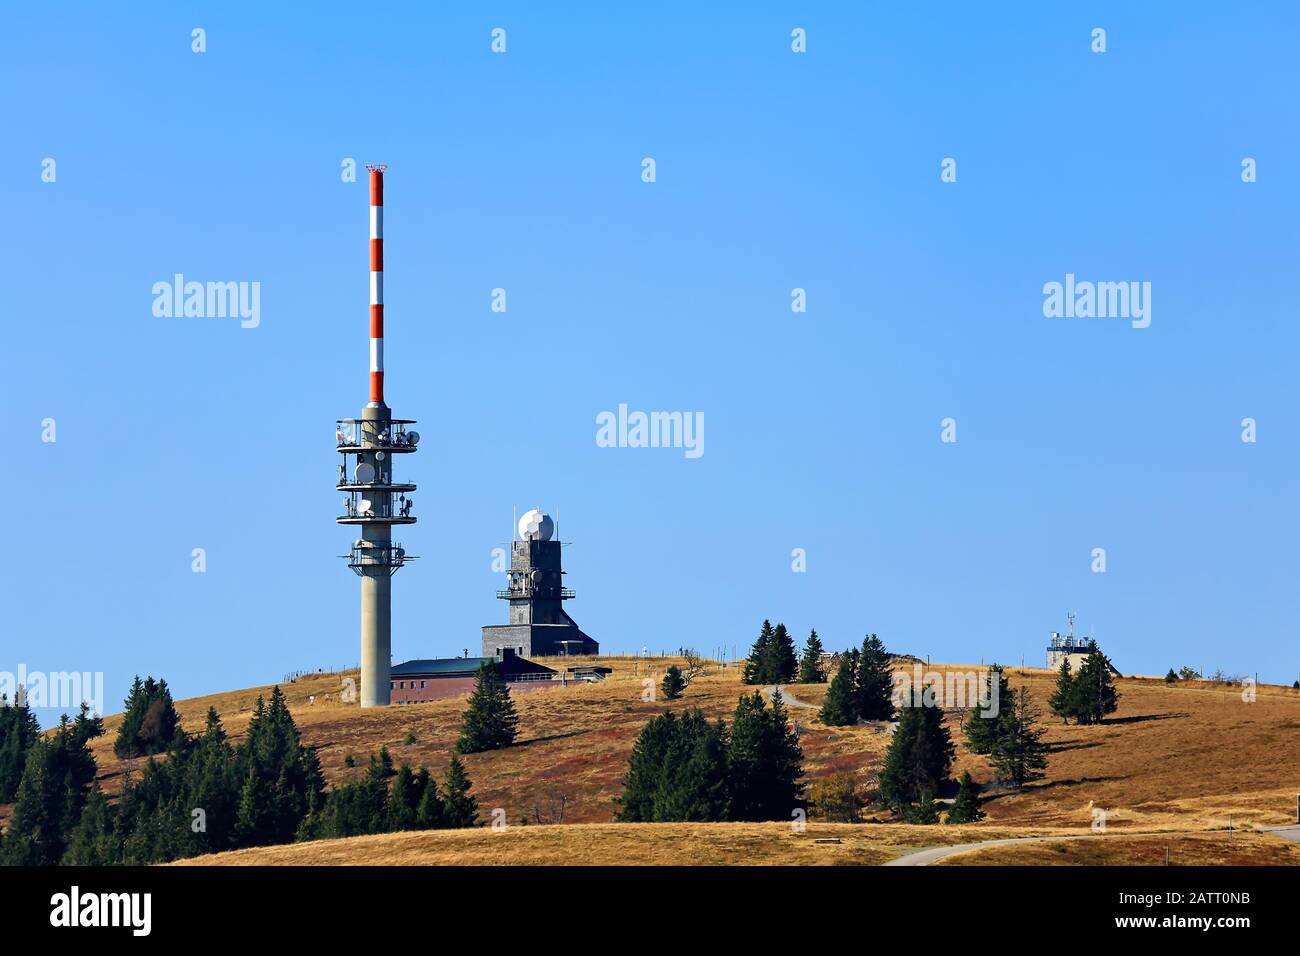 Feldberg Black Forest / Germany - 09 22 2018: Feldberg is a mountain peak in the Black Forest with TV tower. Stock Photo